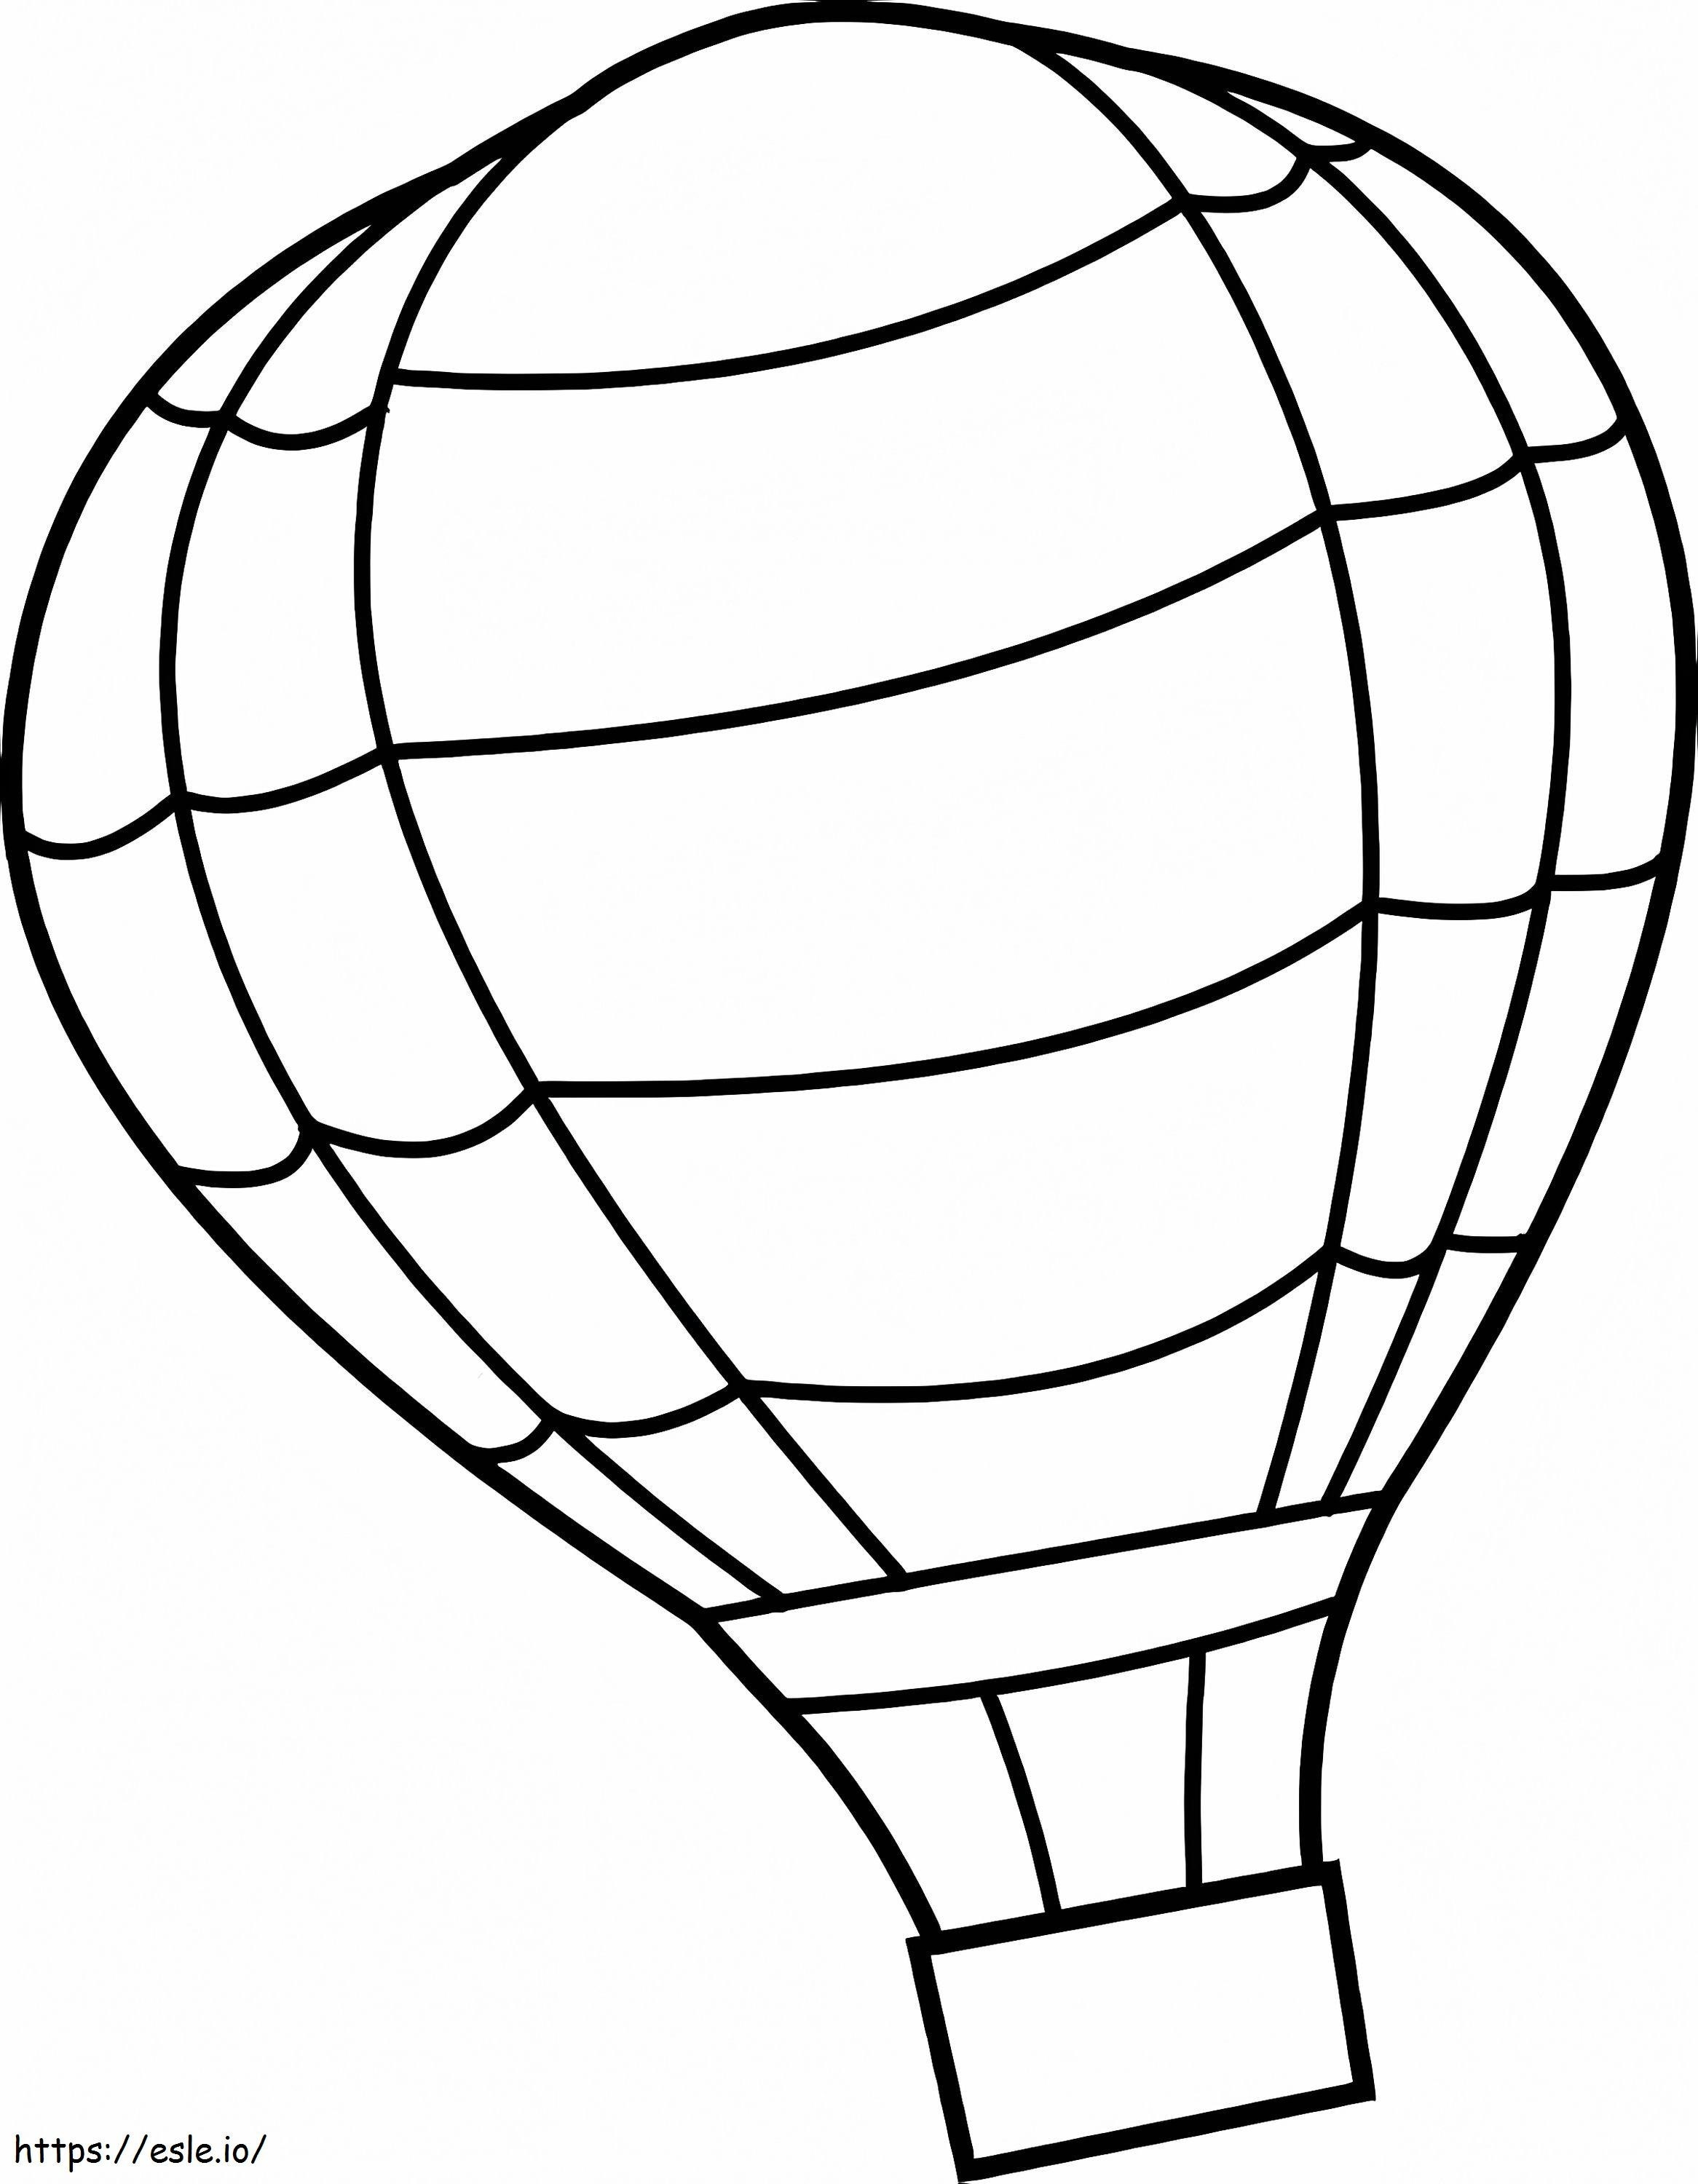 Cool Hot Air Balloon coloring page